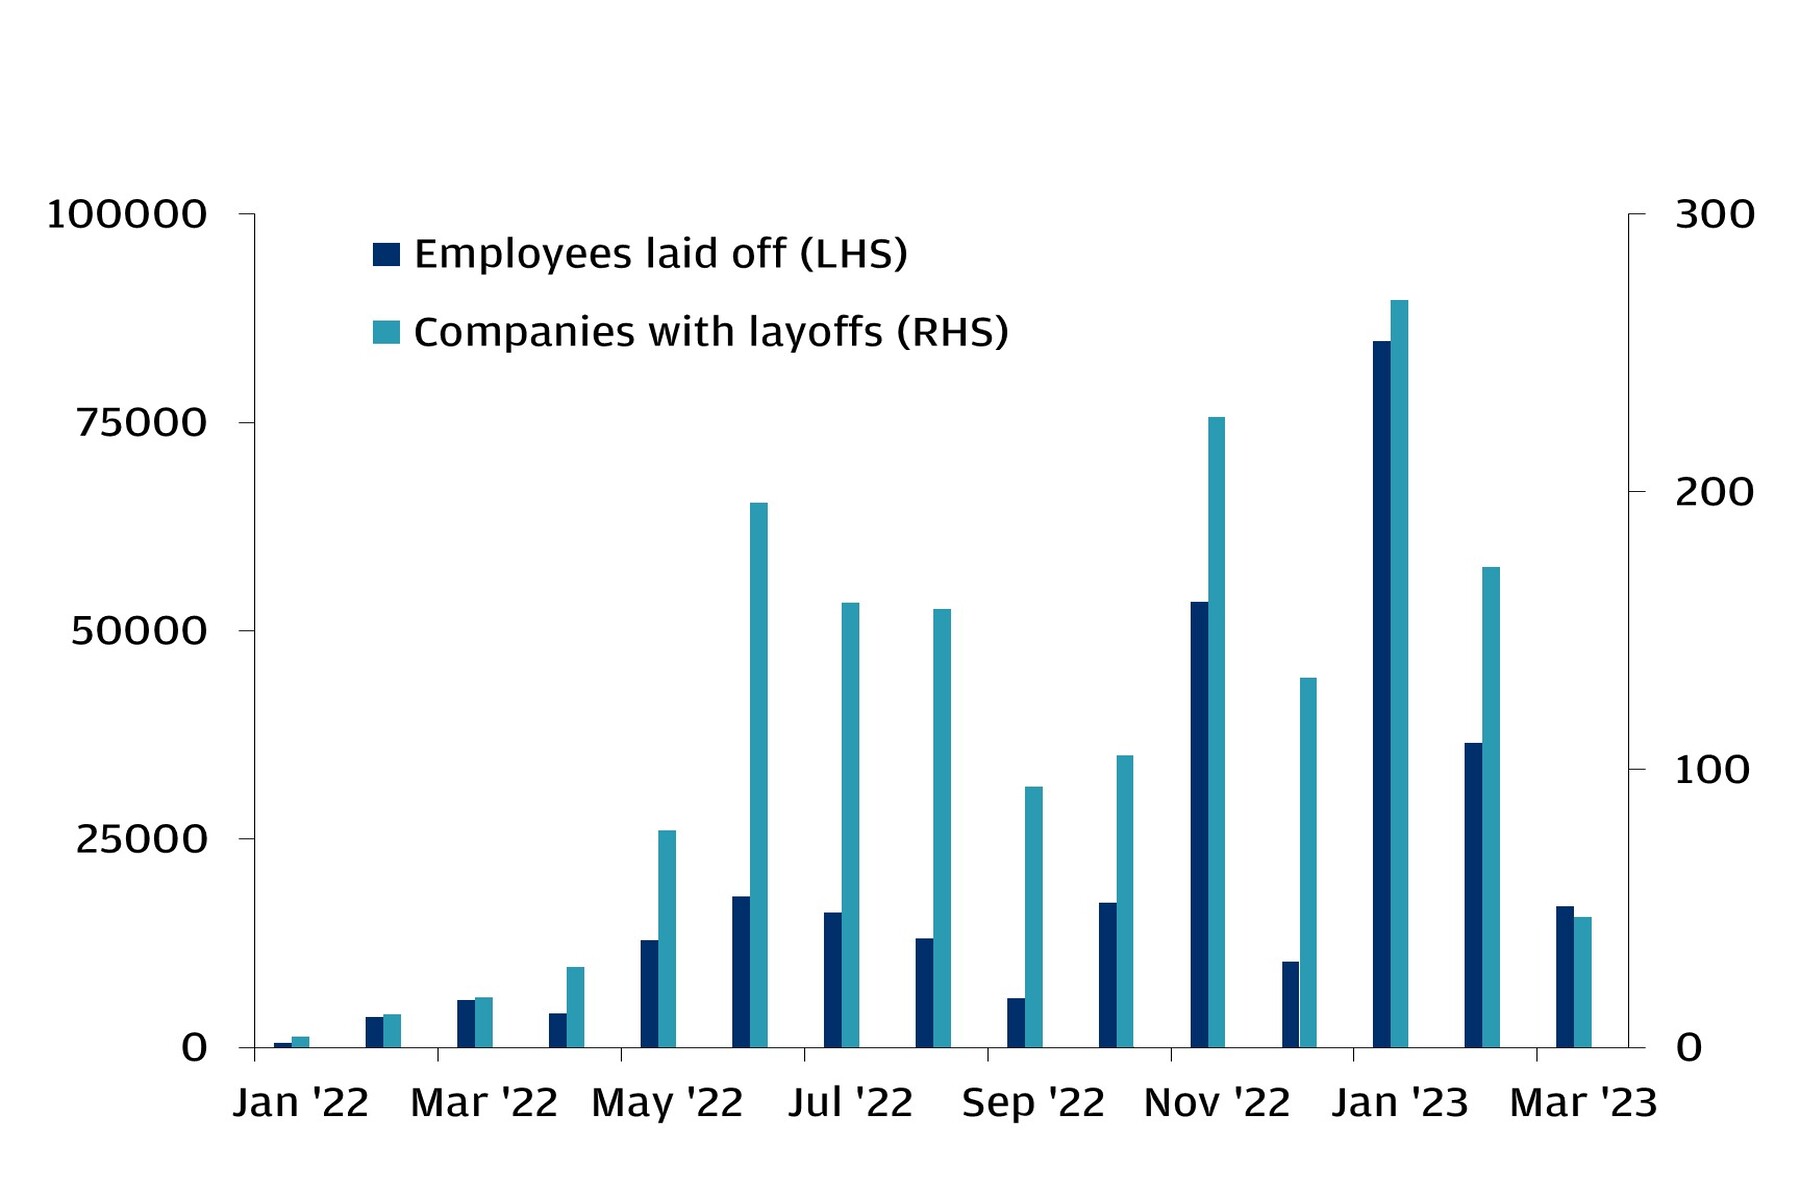 The chart depicts two sets of data, one on the number of employees laid off in a month and the other one on the number of companies with layoffs in a month.